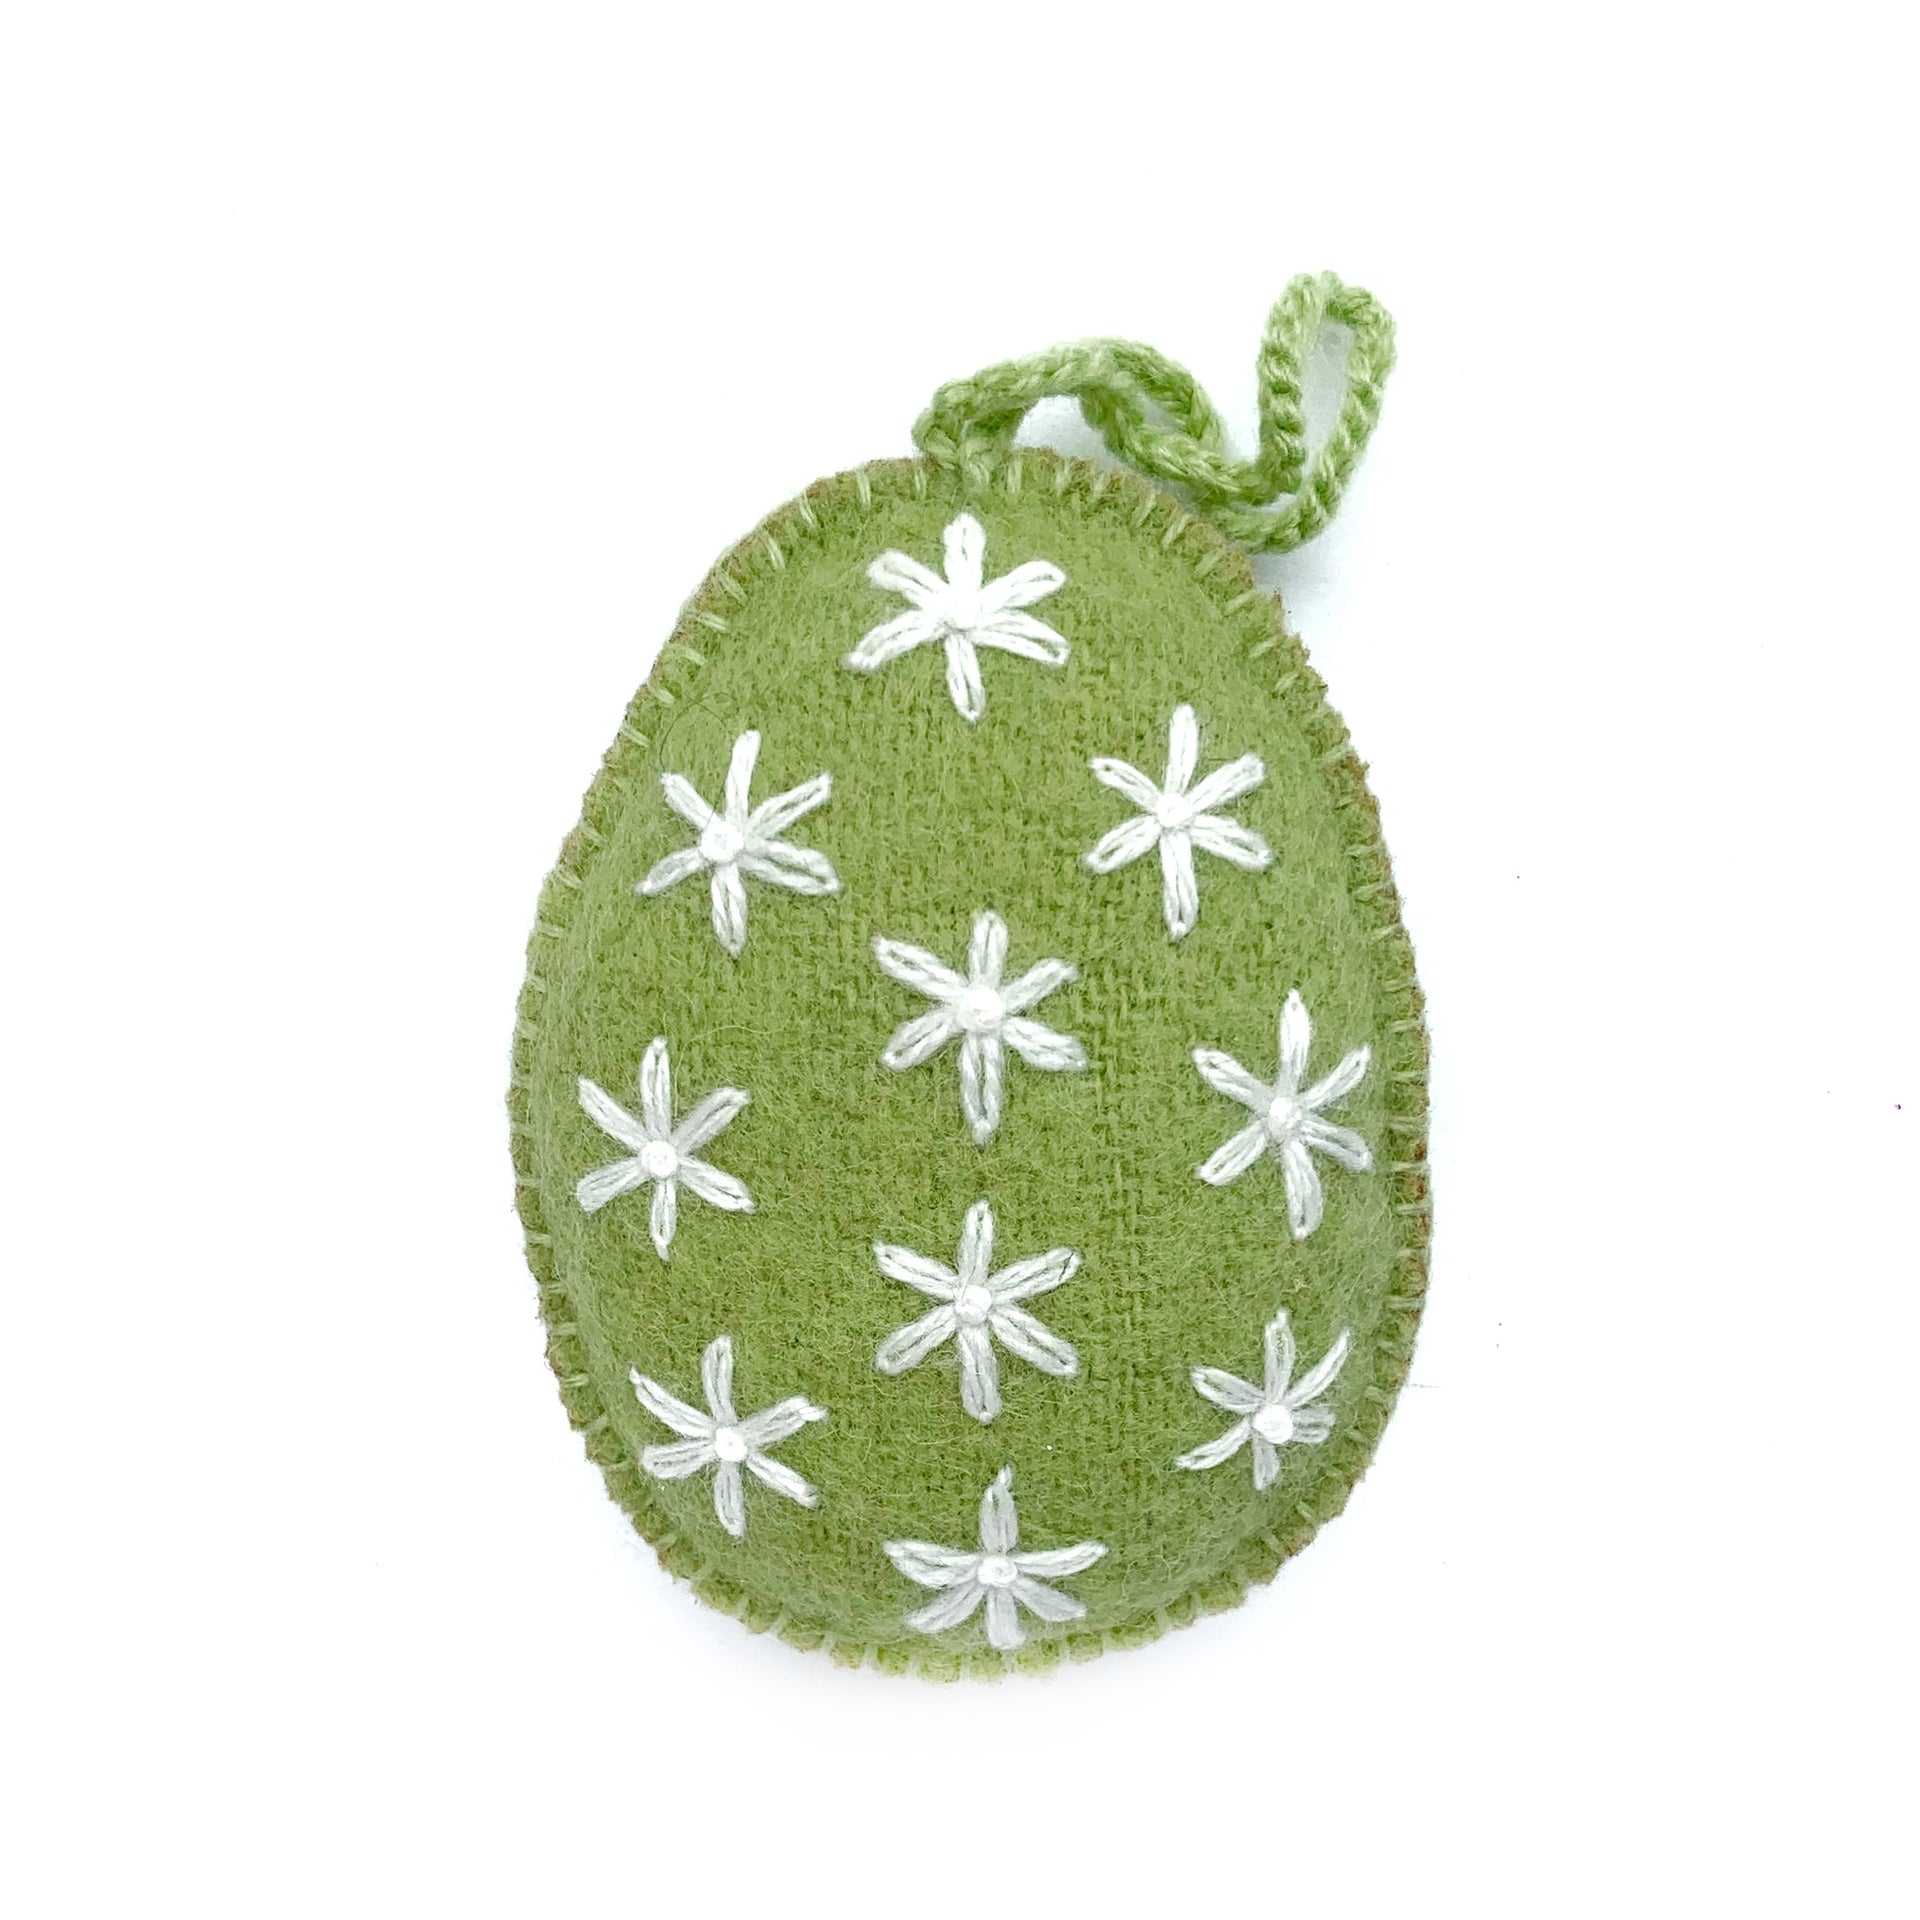 Easter Egg Ornament with Embroidered White Flowers